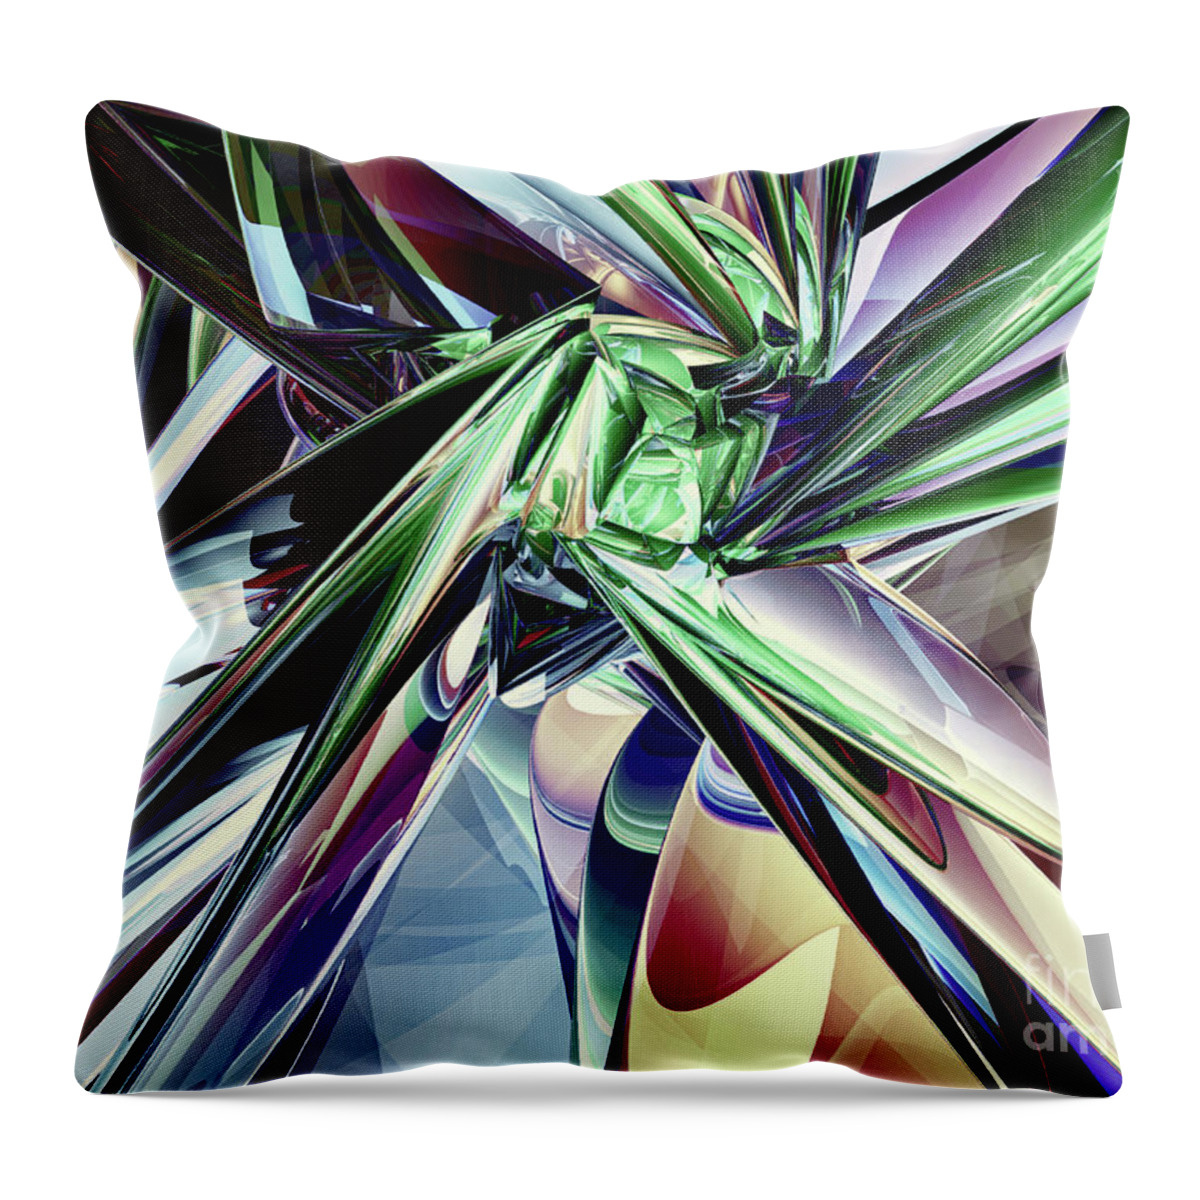 Three Dimensional Throw Pillow featuring the digital art Abstract Chaos by Phil Perkins